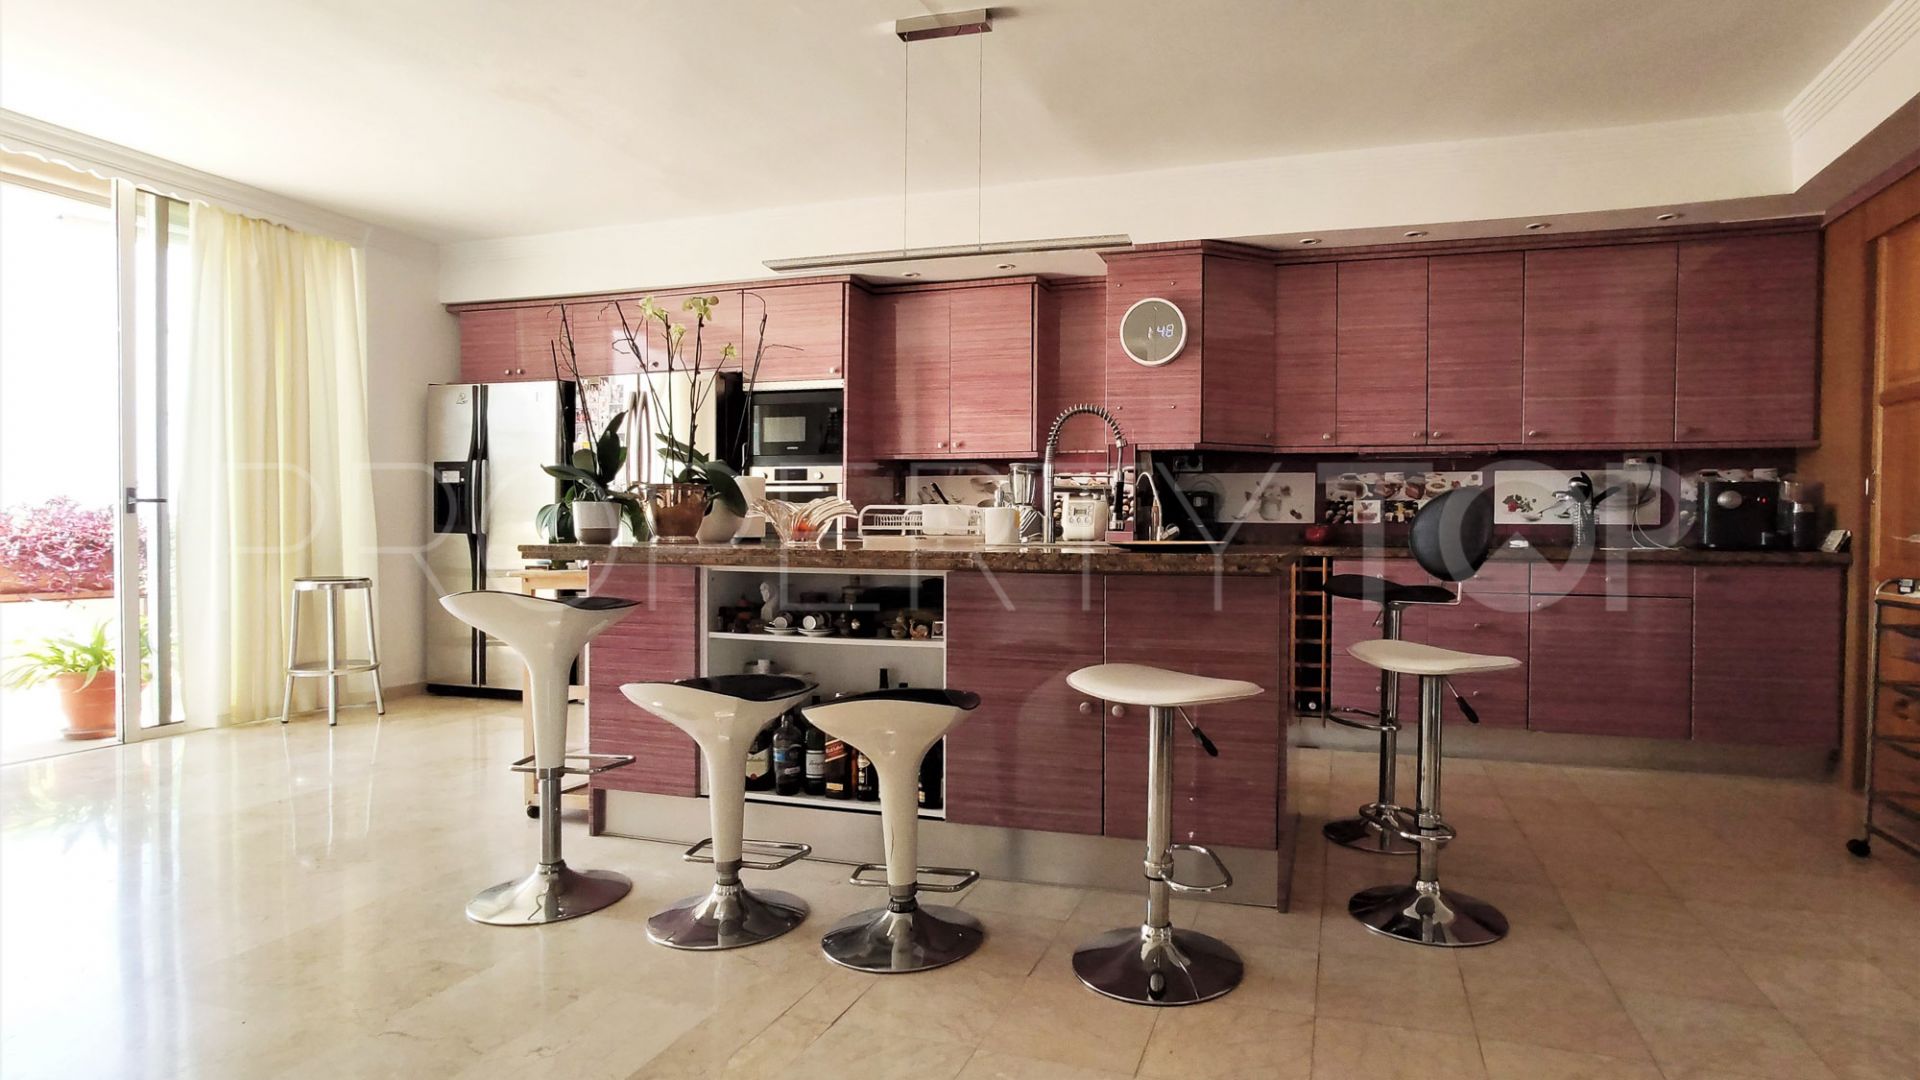 For sale Jardines de Andalucia apartment with 3 bedrooms